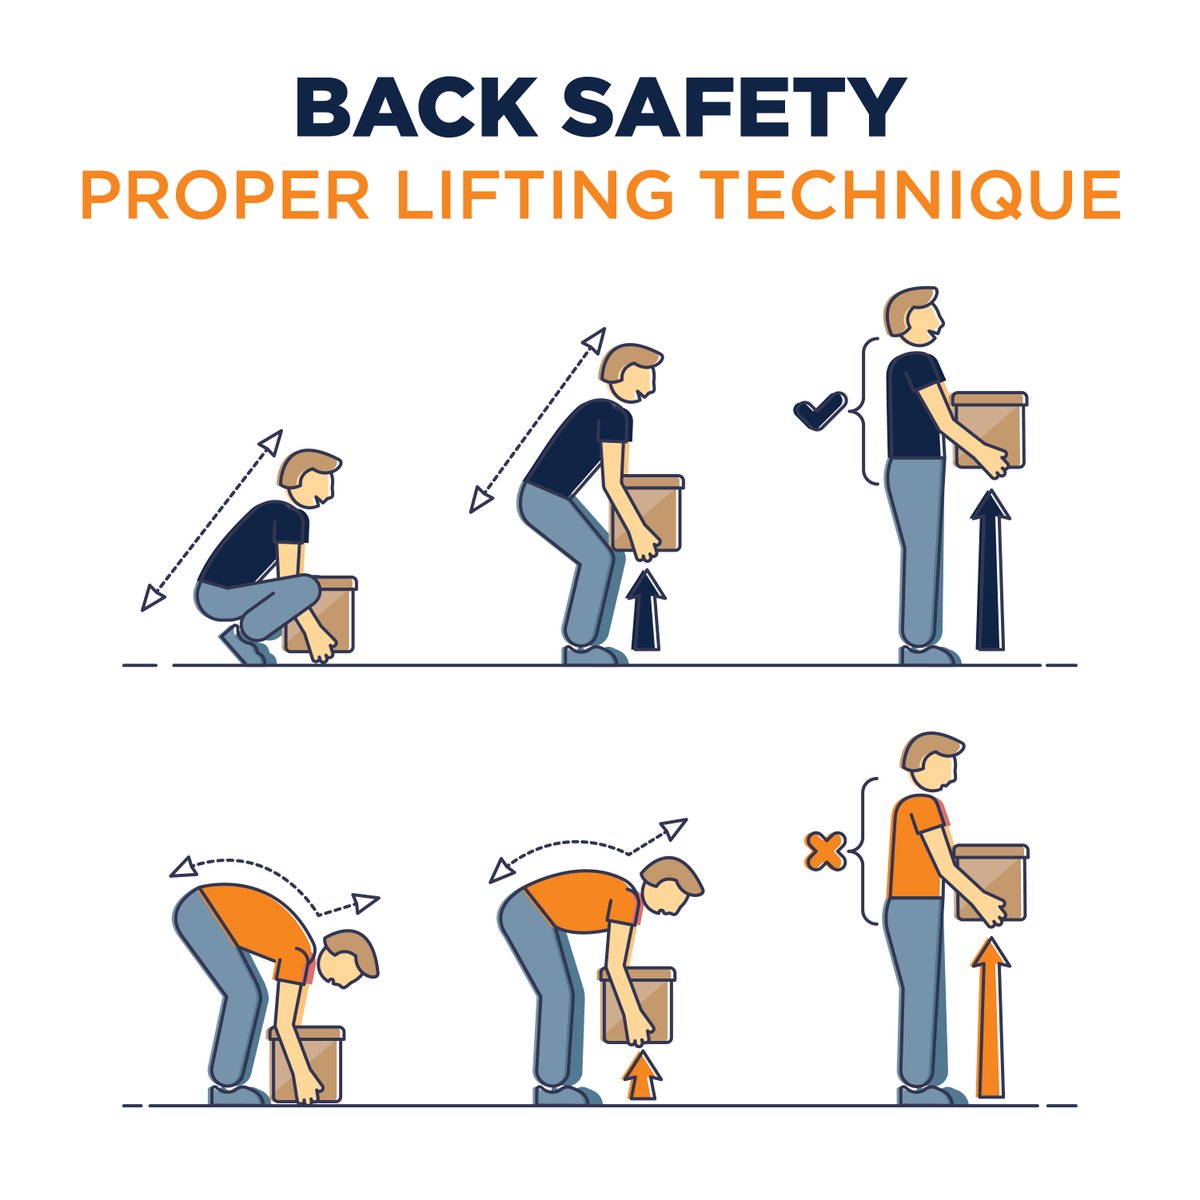 Always keep your back straight, your chest out, and your shoulders back. This helps keep your upper back straight while having a slight arch in your lower back. Slowly lift by straightening your hips and knees, not your back. Keep your back straight and don't twist as you lift!